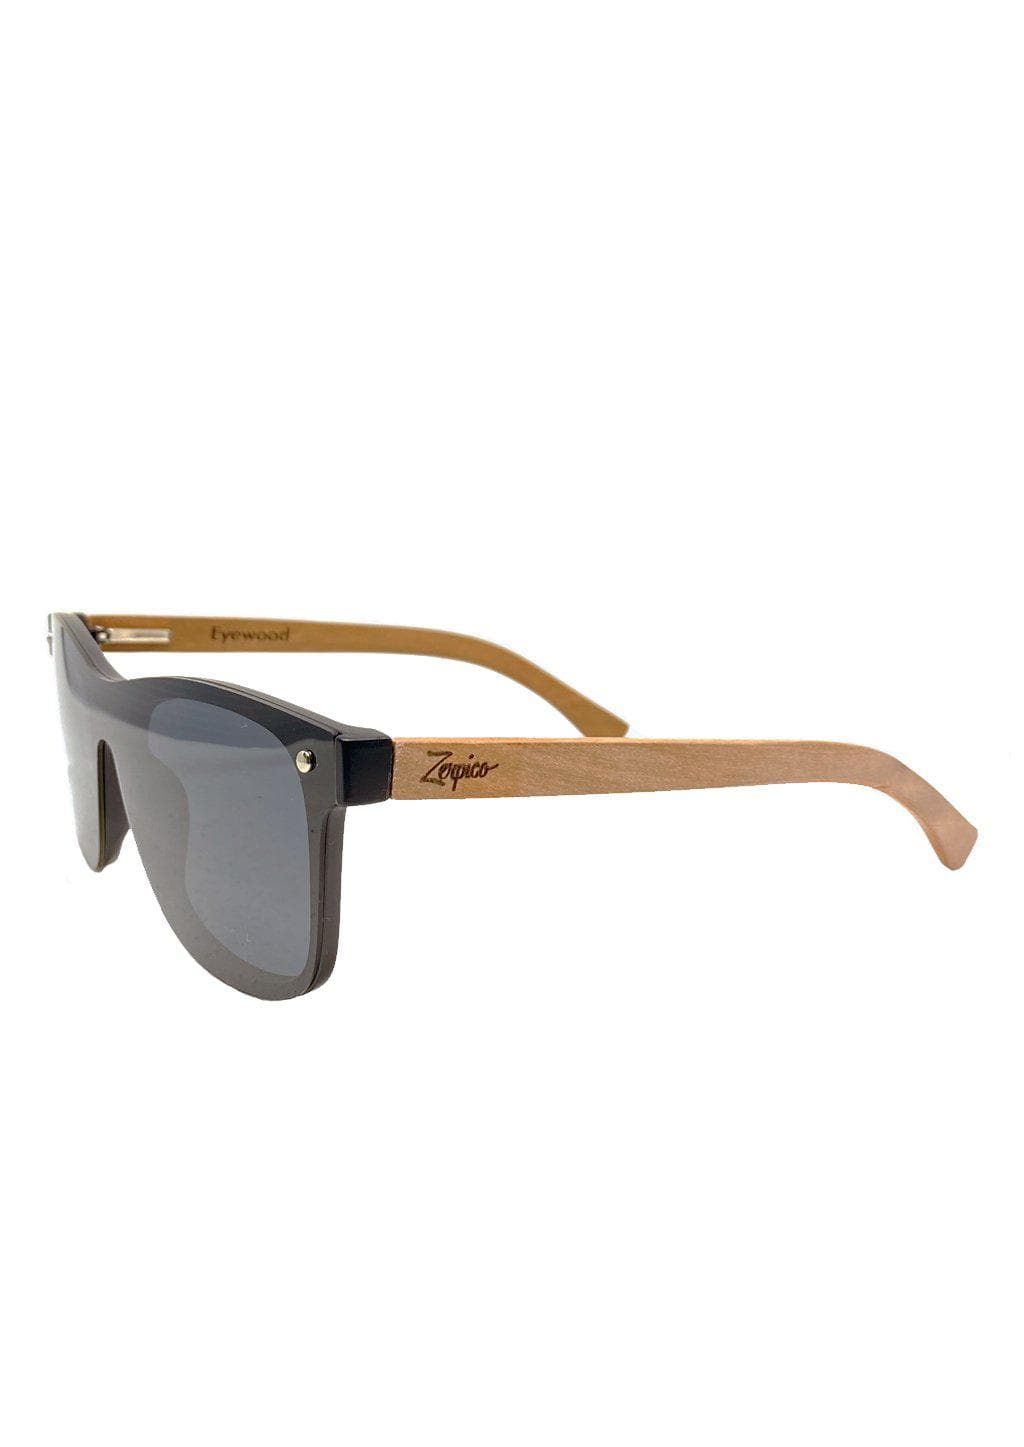 Eyewood tomorrow is our modern cool take on classic models. This is Taurus with black lenses. Nice wooden sunglasses. From the side.